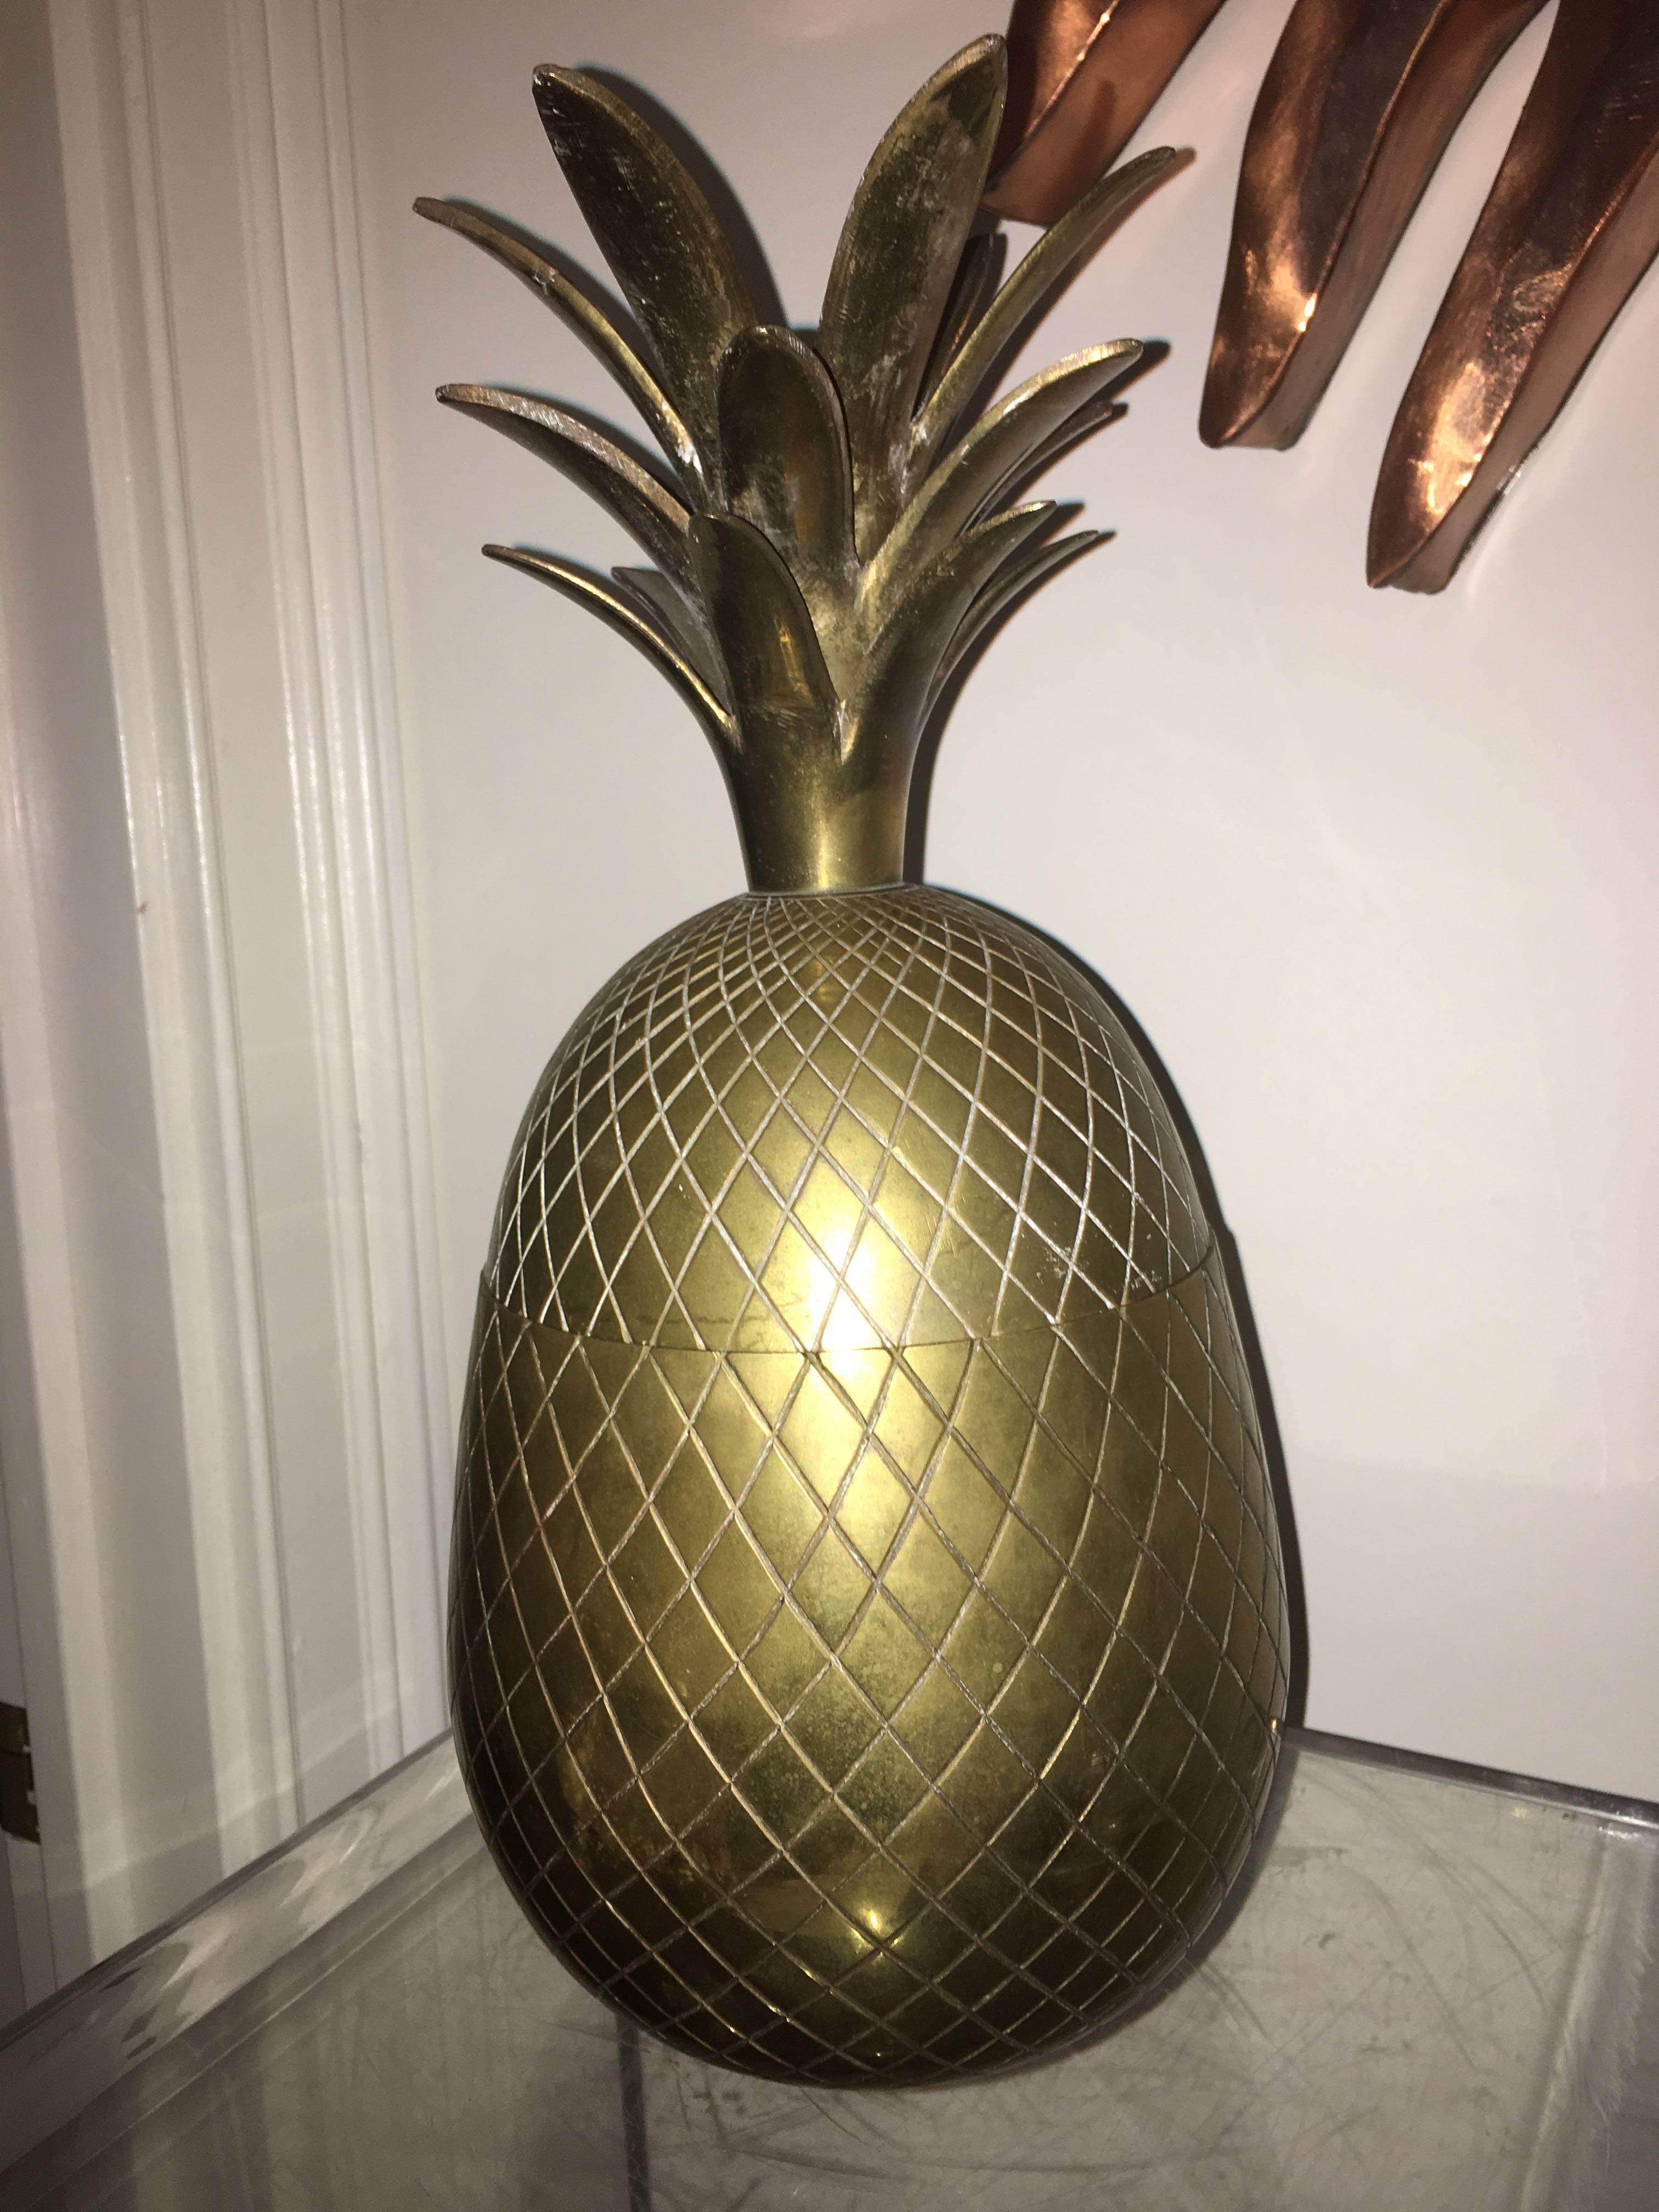 Terrific vintage large brass pineapple ice bucket. Perfect for your bar decor.